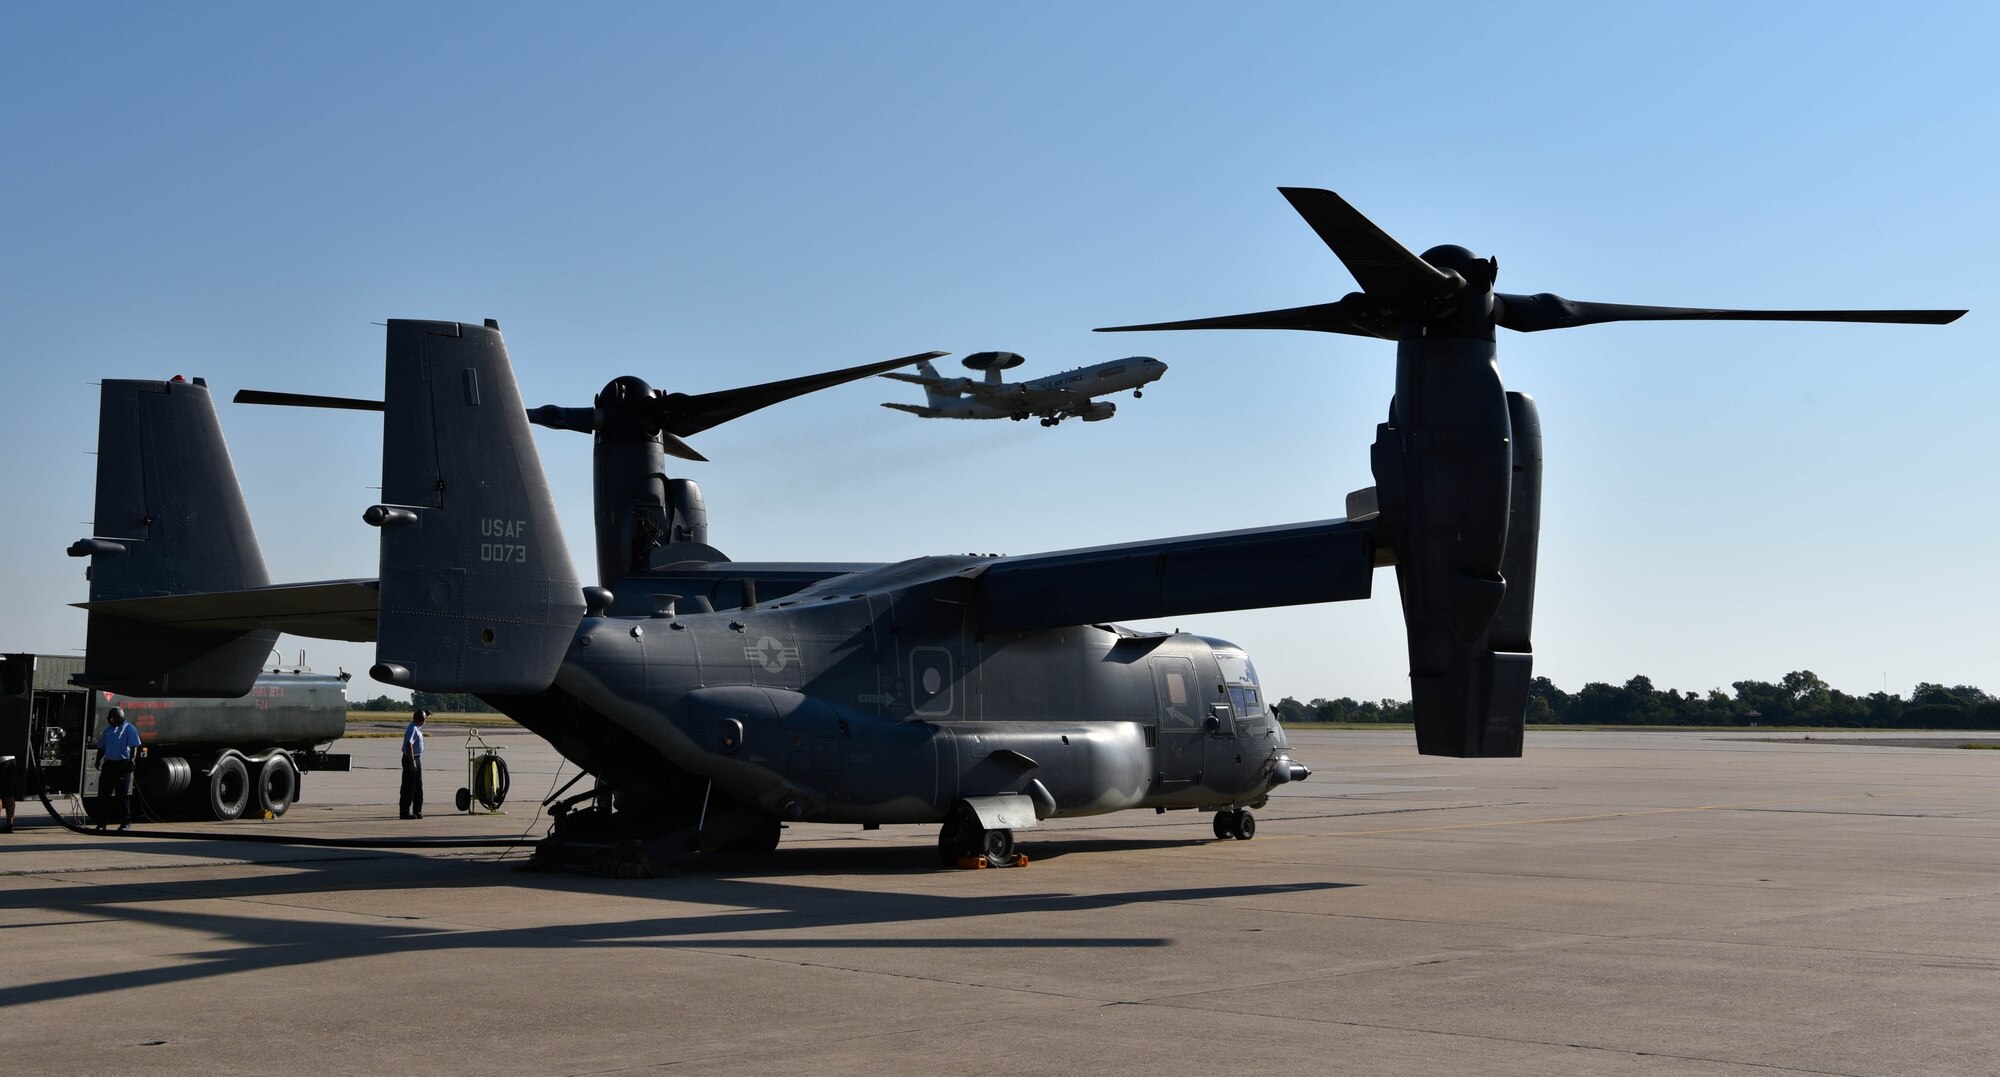 An E-3 Sentry Airborne Warning and Control System aircraft from Tinker Air Force Base, Joint Surveillance and Target Attack Radar System aircraft from Robins AFB, MQ-9 Reapers operated from Ellington Field Joint Reserve Base, MC-12s from the 137th Special Operations Wing, CV-22 Osprey and AC-130 Gunships from Cannon AFB, an MC-130H Combat Talon IIs from Hurlburt AFB and KC-135R Stratotankers from the 314th Air Refueling Squadron at Beale AFB participated in SENTRY REX 20-03. Sentry Rex is a joint-exercise hosted by the 552nd Air Control Wing, specializing in Combat Search and Rescue mission integration.